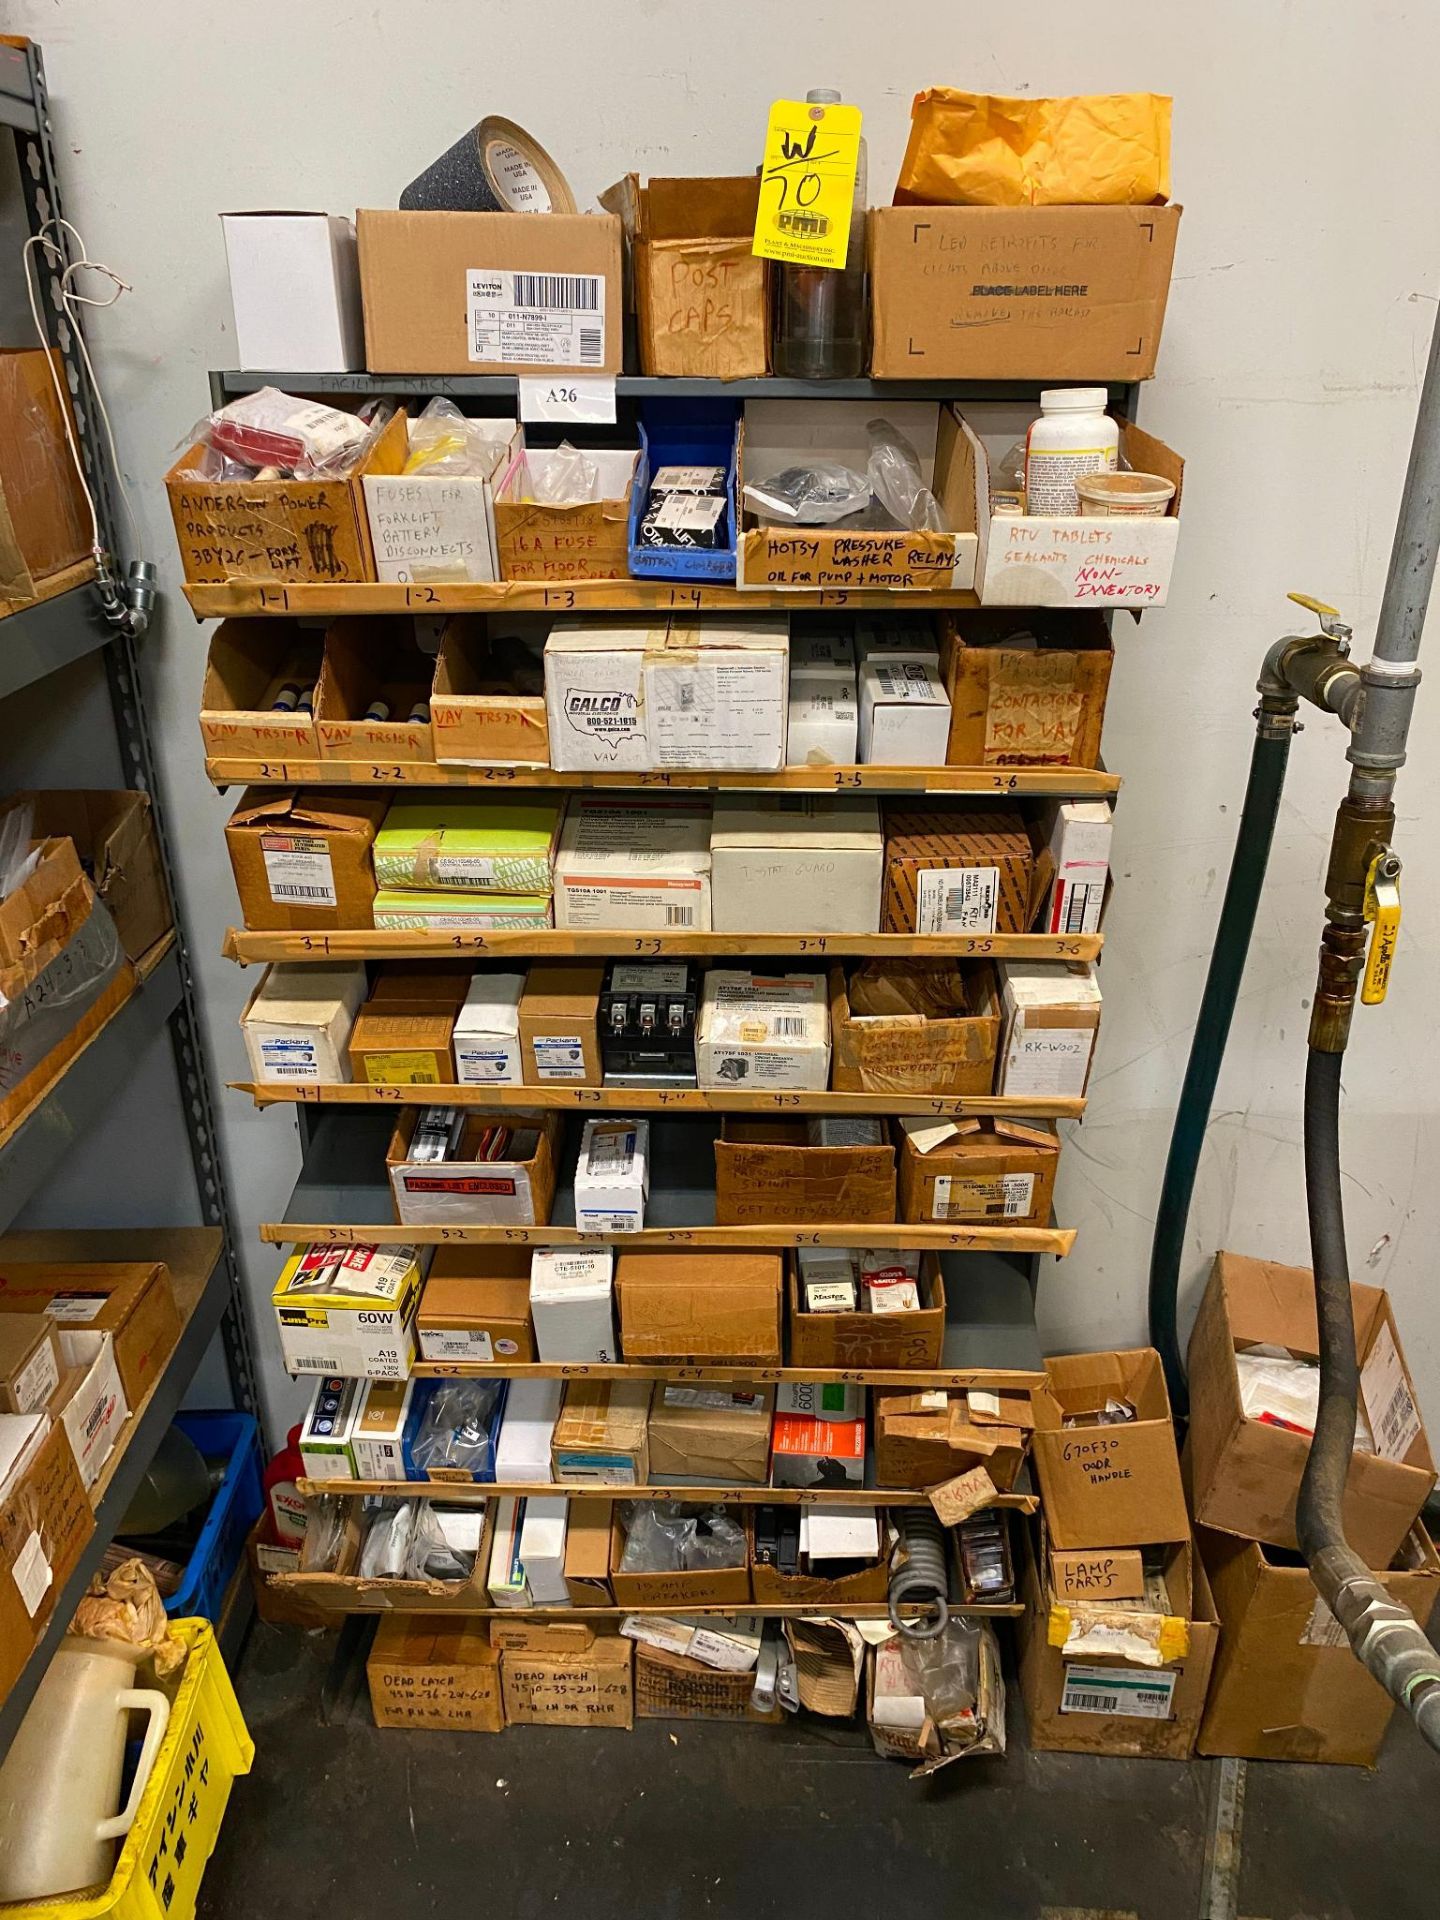 LOT OF INGERSOLL-RAND & ATLAS COPCO MAINTENANCE ITEMS: hoses, belts, relays, large assortment of - Image 2 of 6